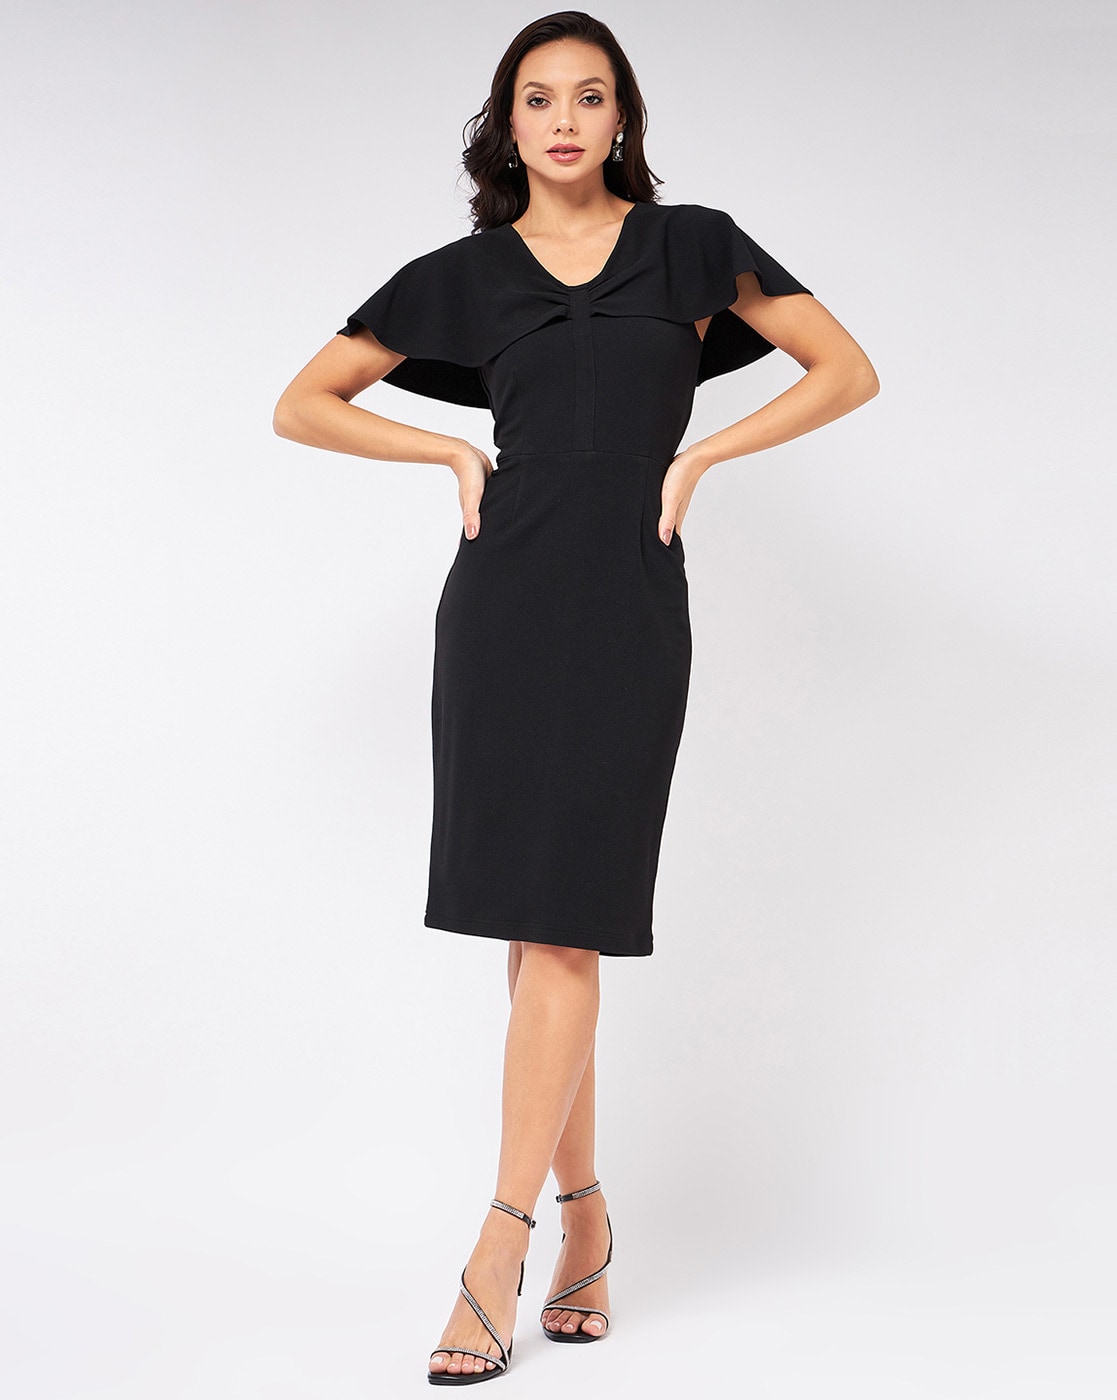 Wrapped Up In Love Black Satin Faux-Wrap Midi Dress | Midi dress with  sleeves, Nordstrom dresses, Dress